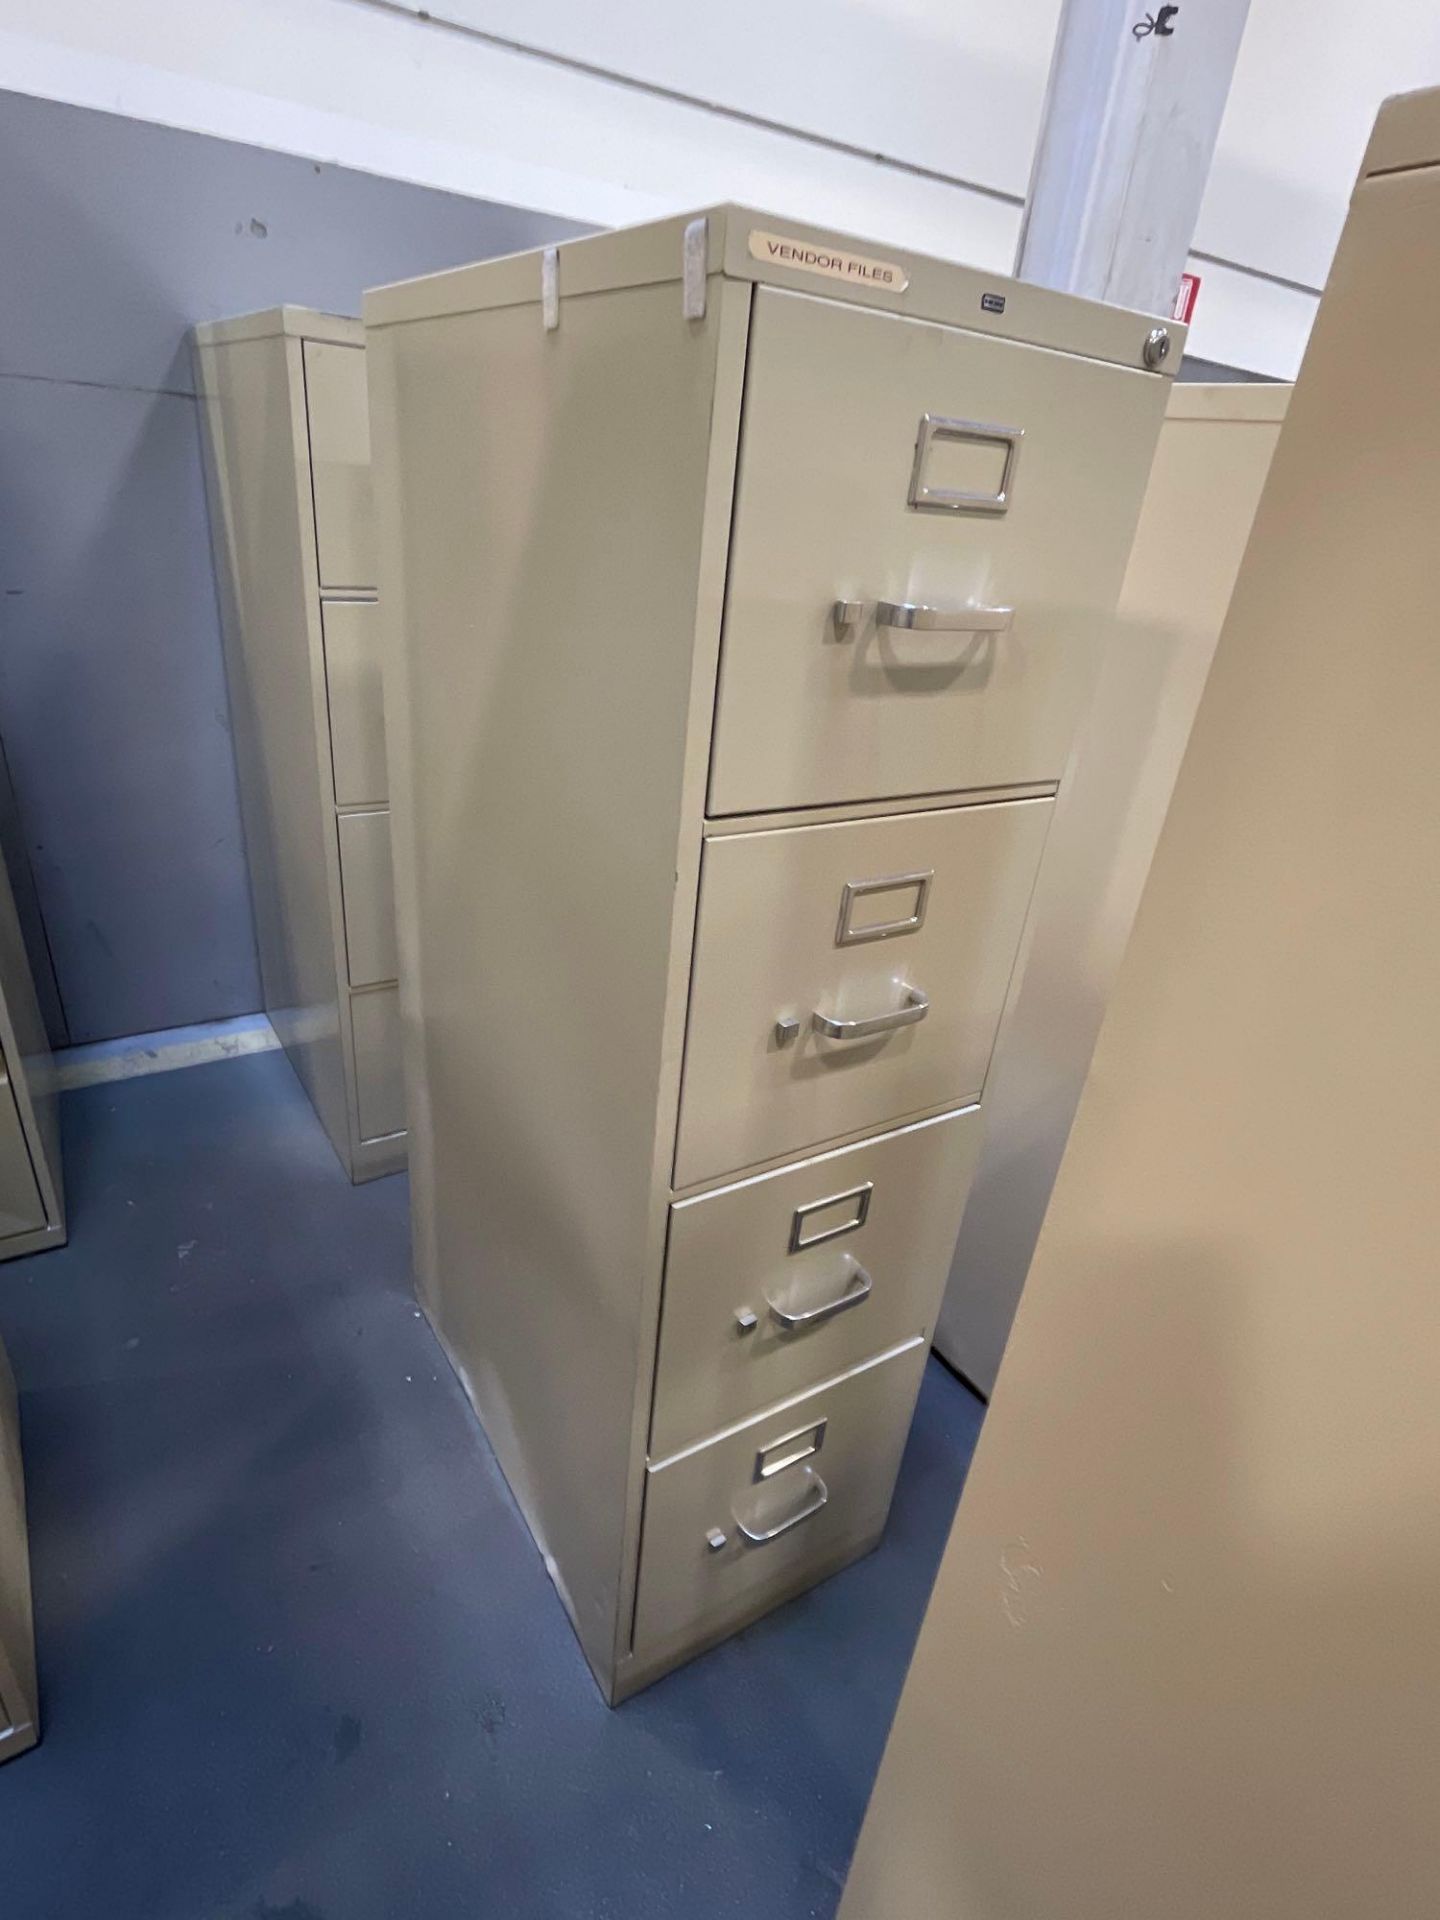 Lot of 6 Hon File Cabinets: (3) 29" X 15" X 52", (2) 26" X 18" X 52", (1) 26" X 15" X 60" - Image 5 of 7